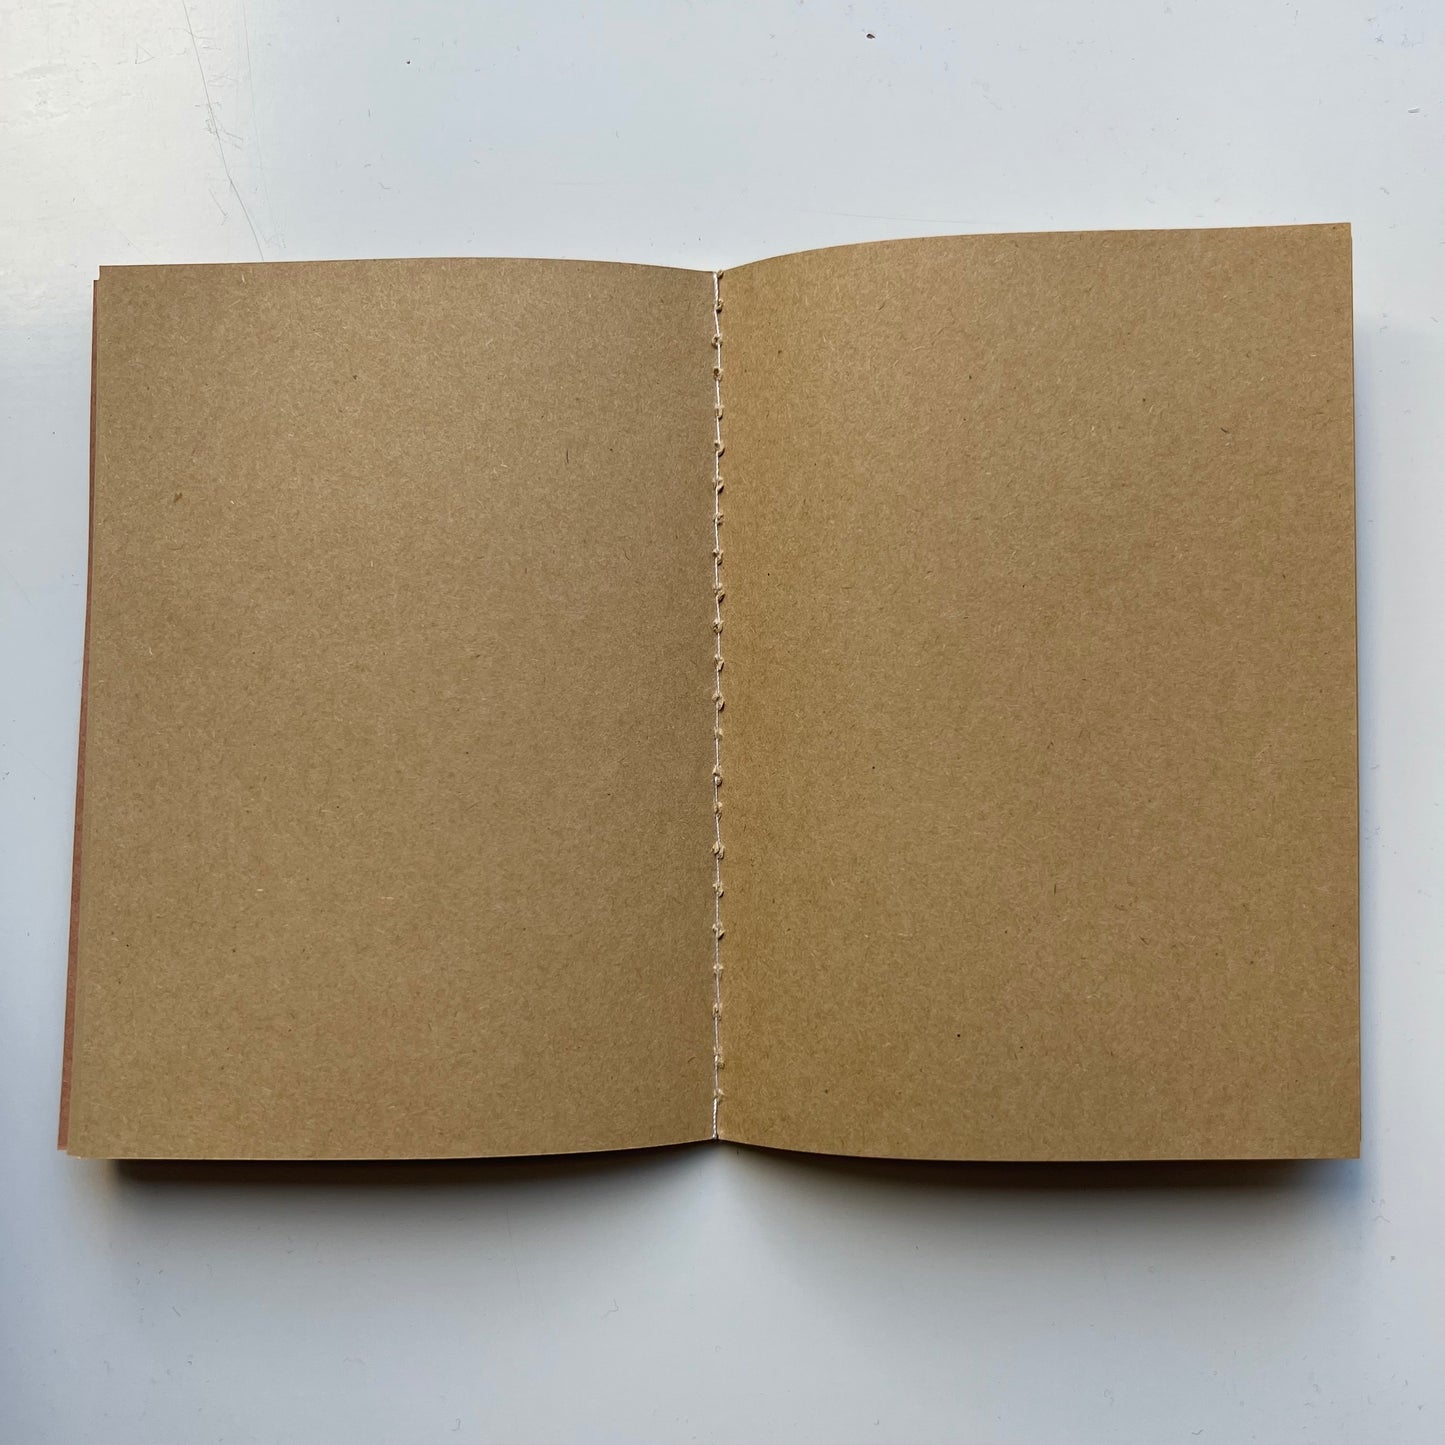 Inside of the A6 Recycled Notebook demonstrating its plain kraft pages. 